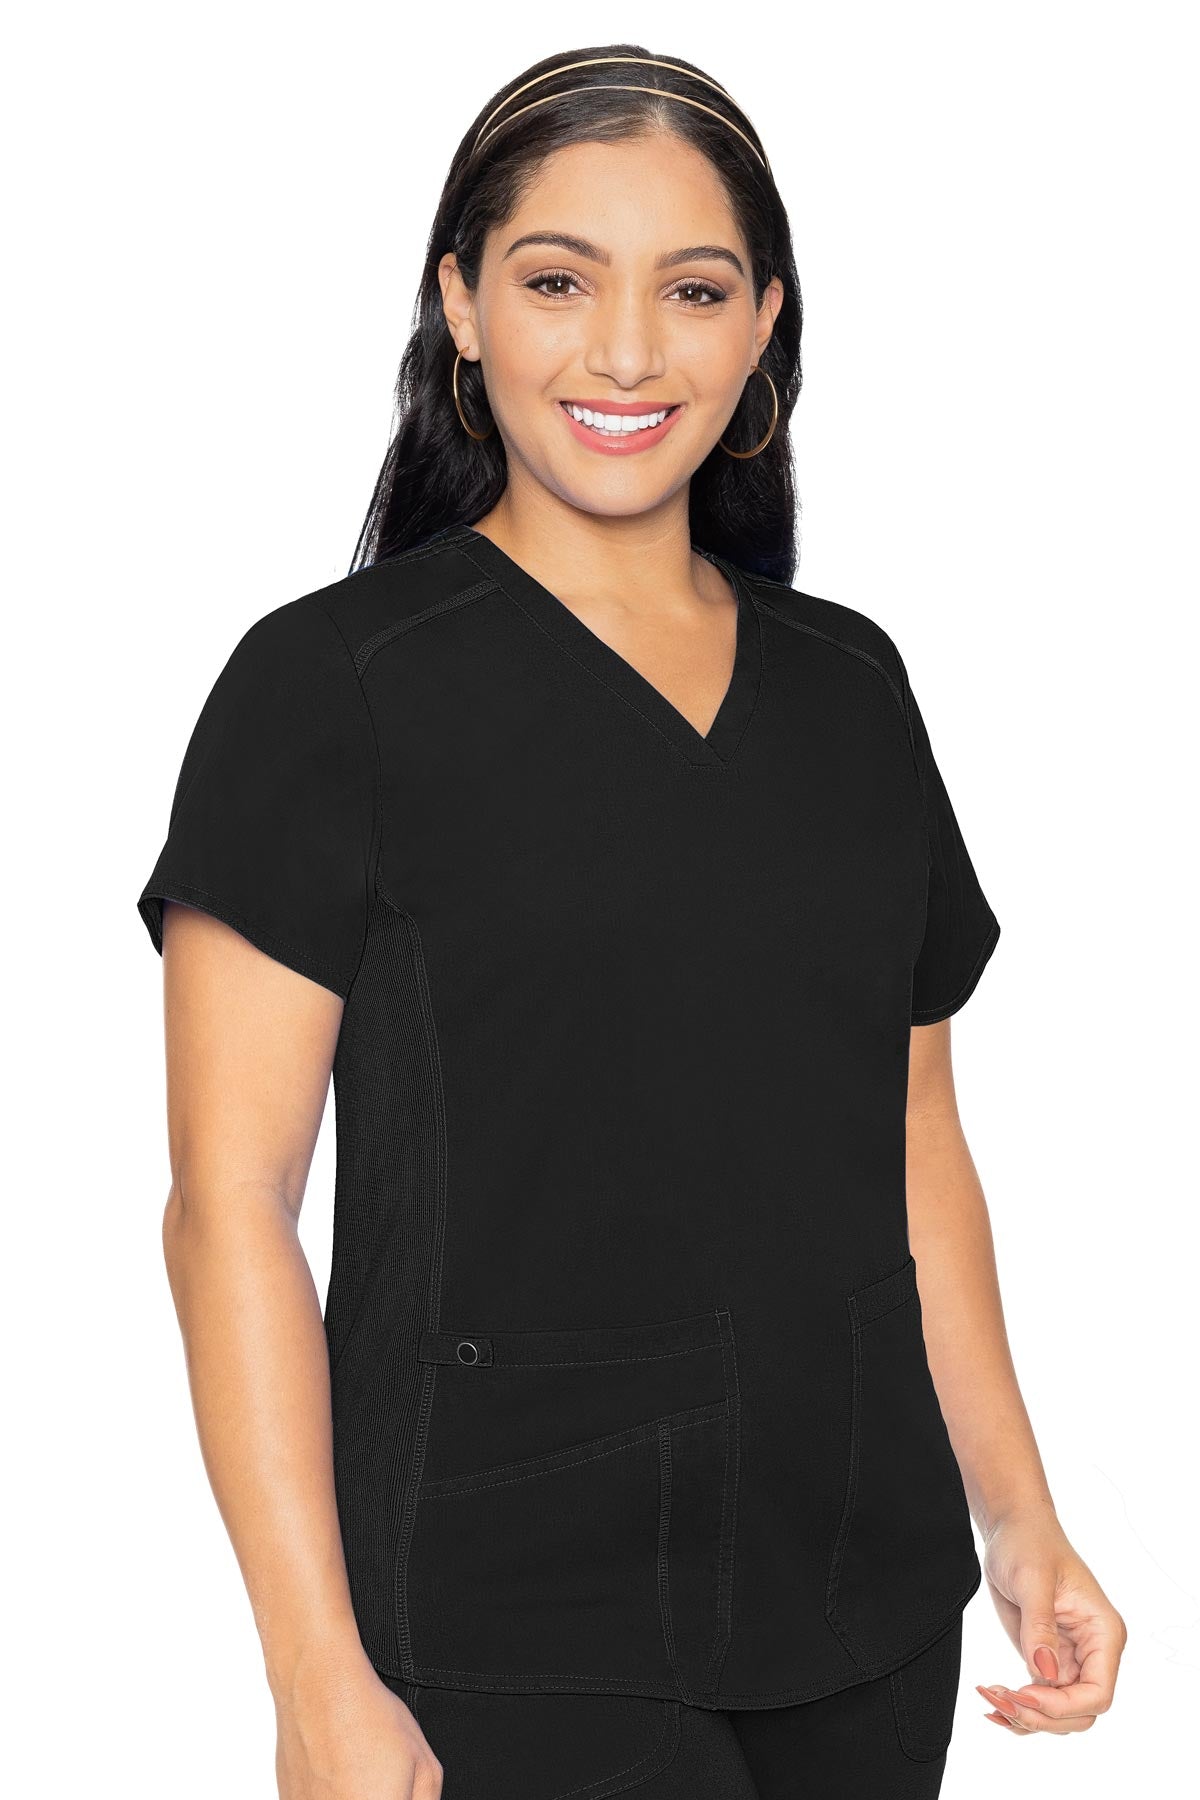 Med Couture Black TOP